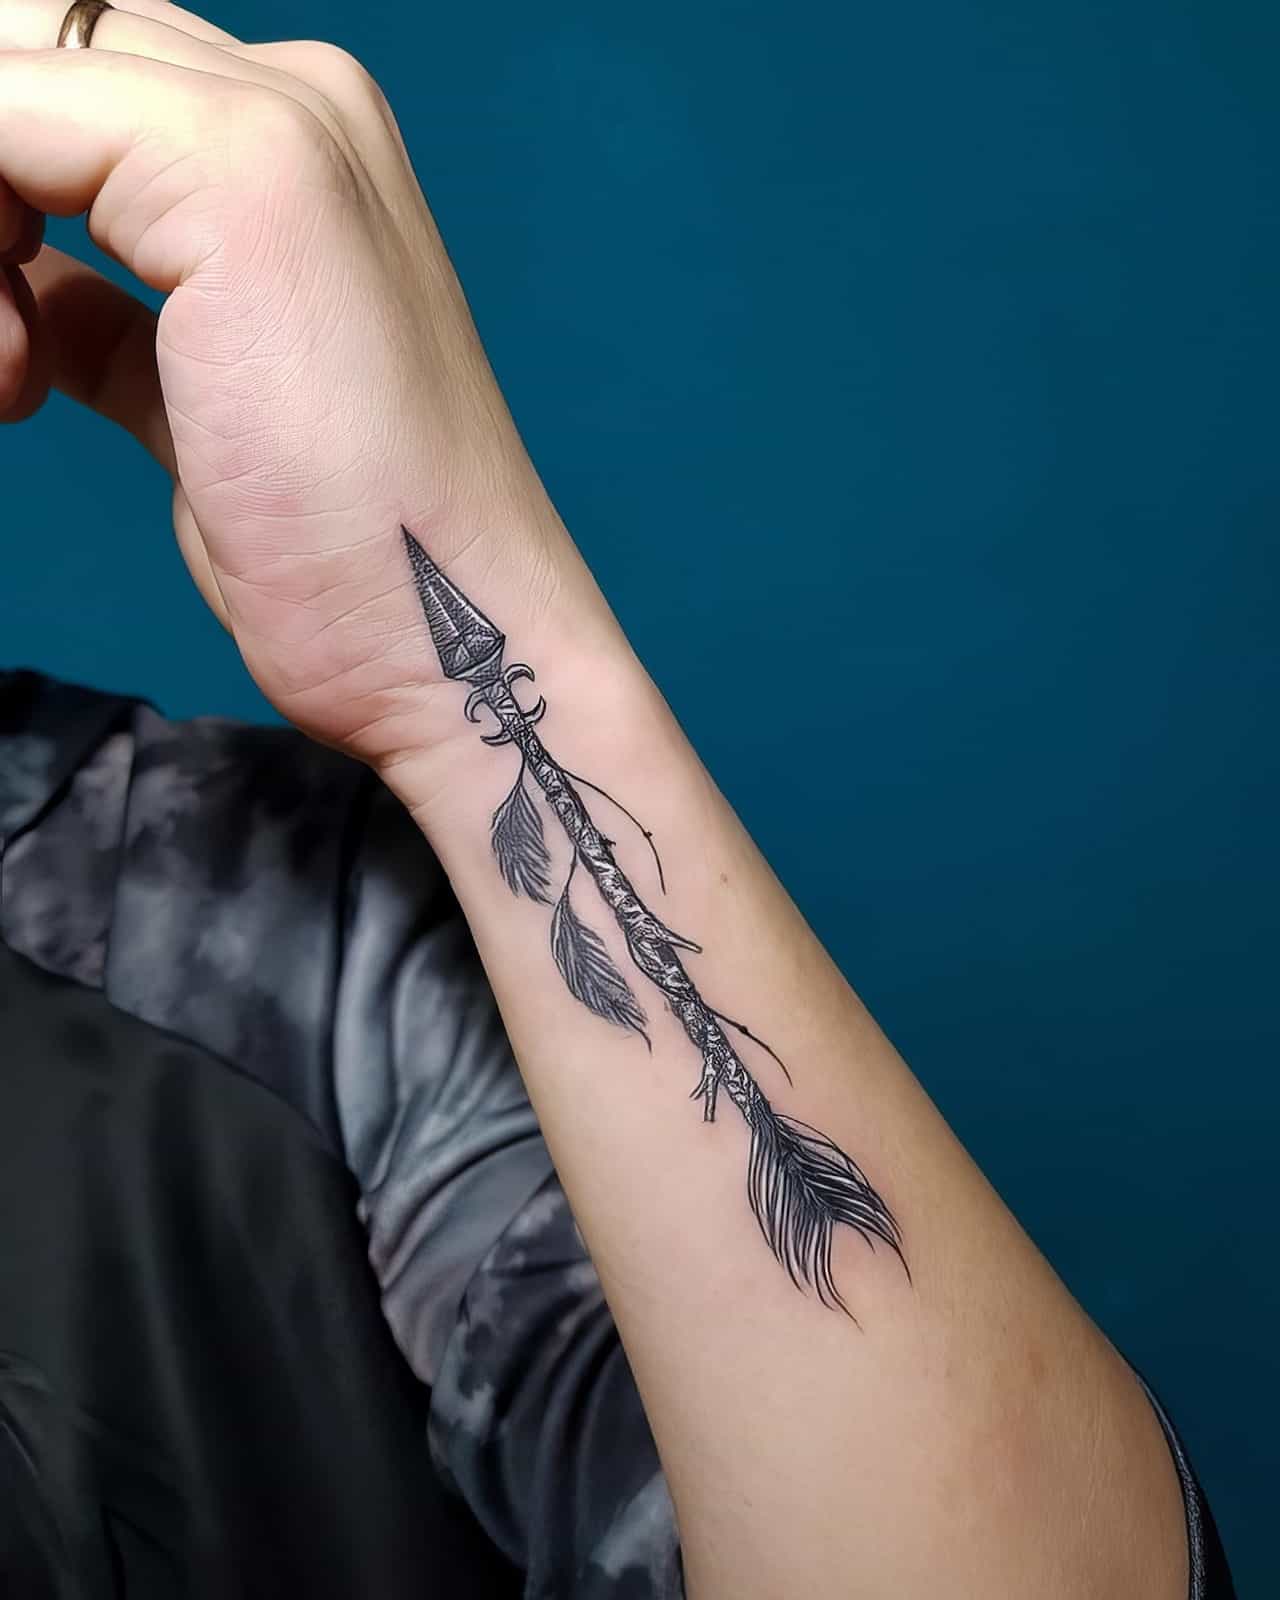 Arrow Tattoo Vector Art PNG, Arrow Tattoo Vector For Hand Art Design, Arrow  Tattoo Design, Arrow Tattoo, Tattoo Clipart PNG Image For Free Download